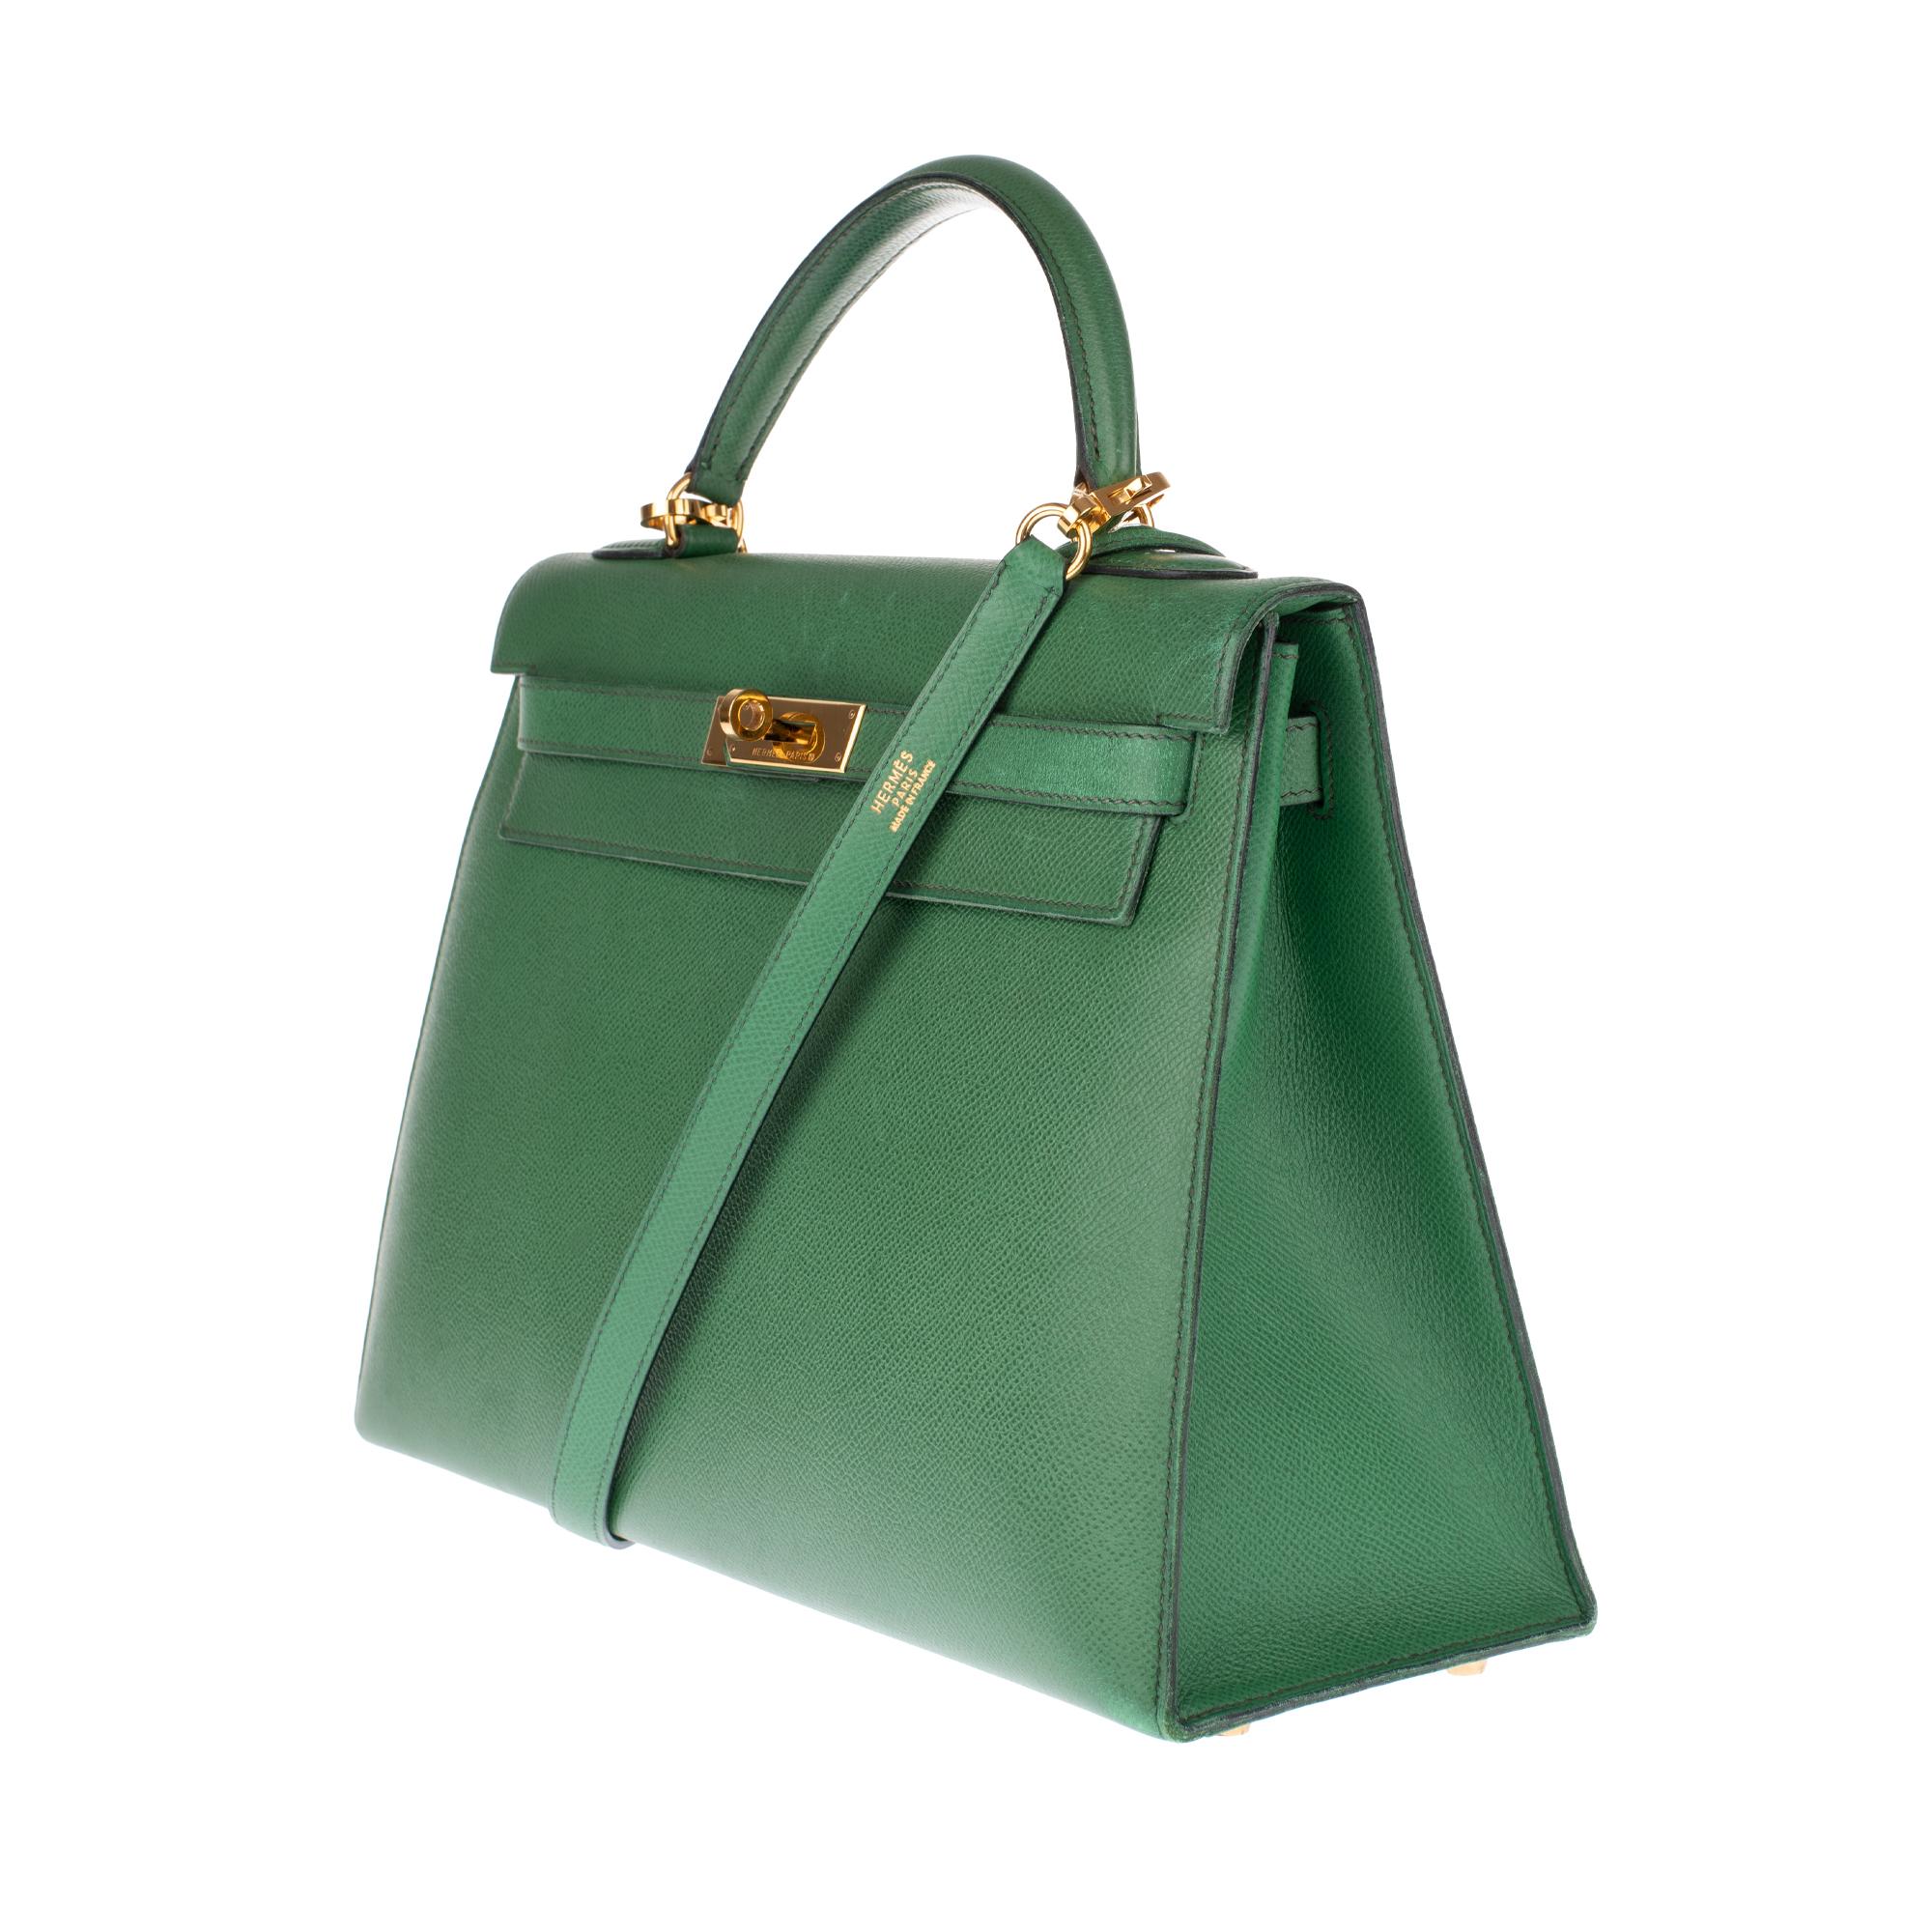 Gray Amazing handbag Hermès Kelly 32 sellier with strap in green courchevel leather !